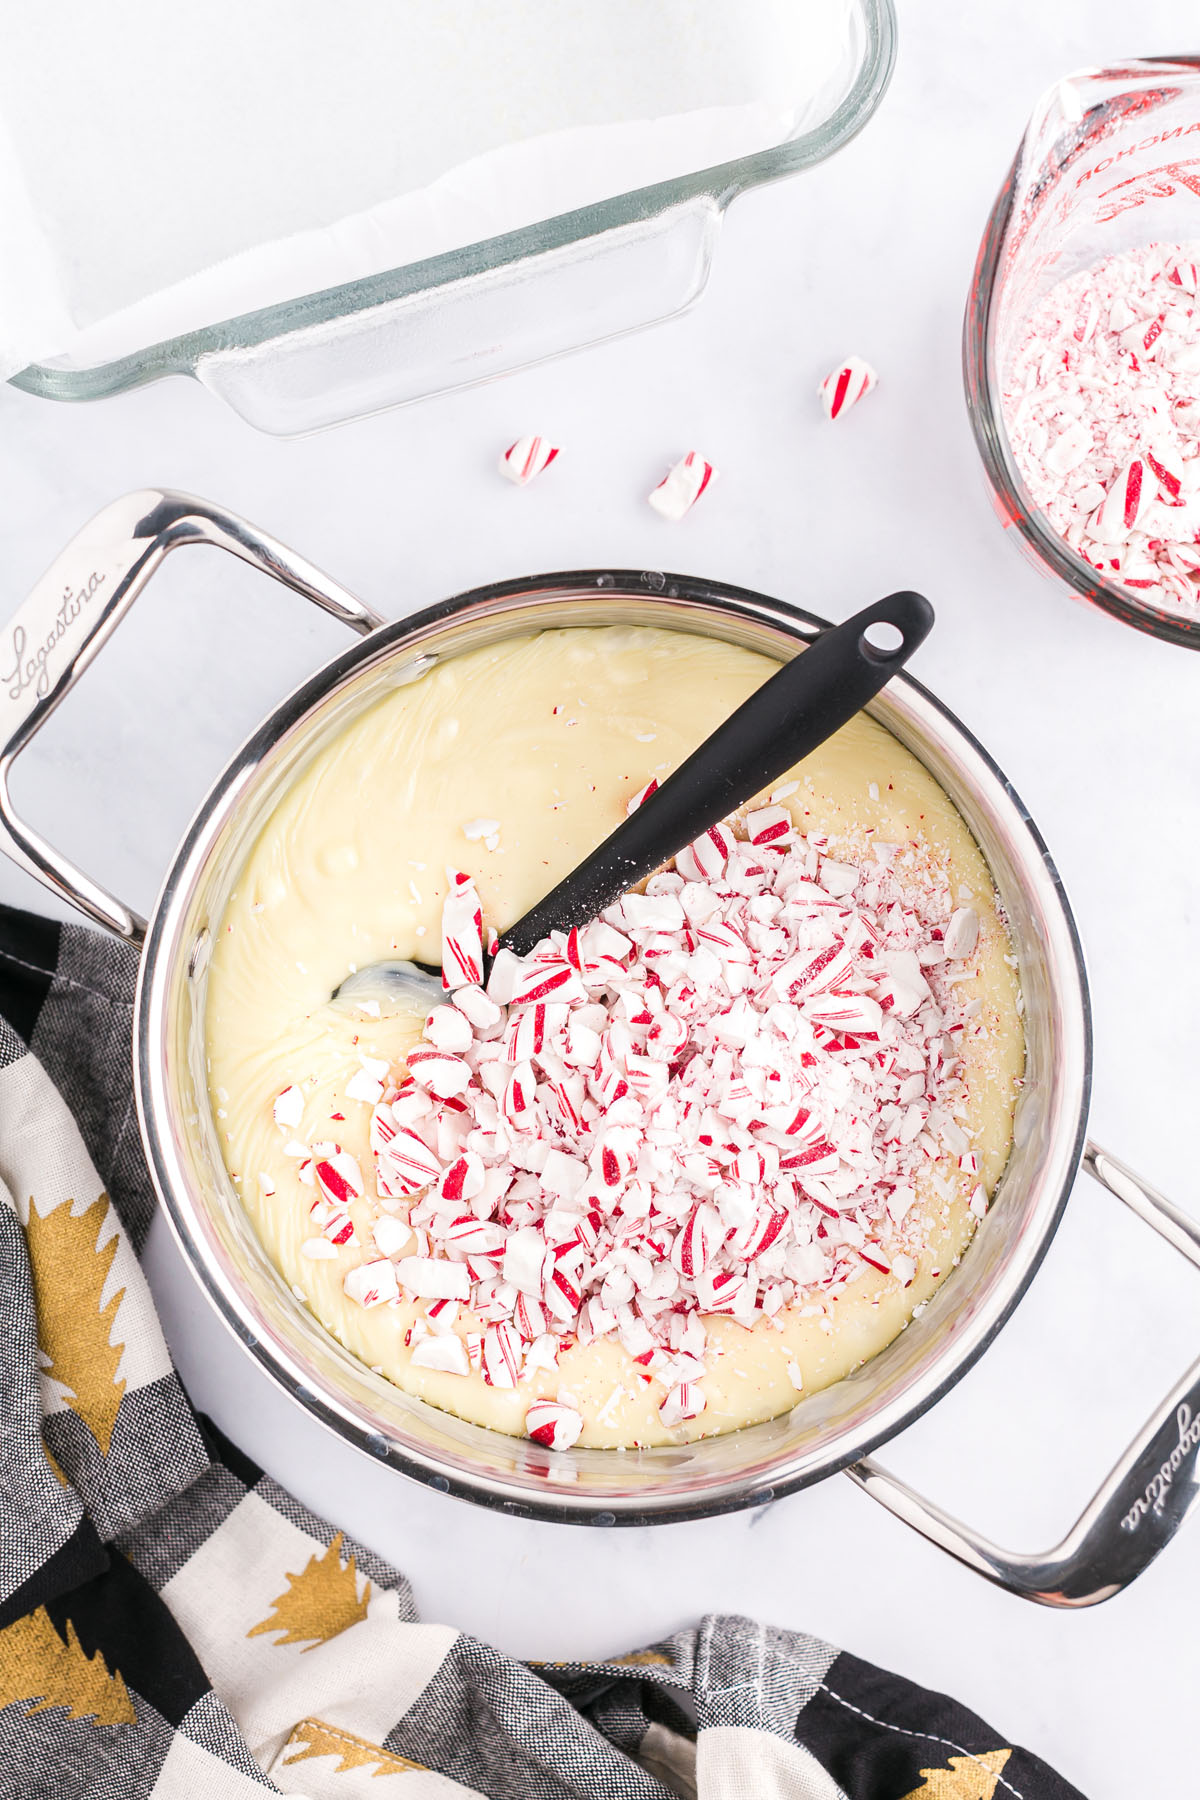 white chocolate chips + crushed candy cane in the pan